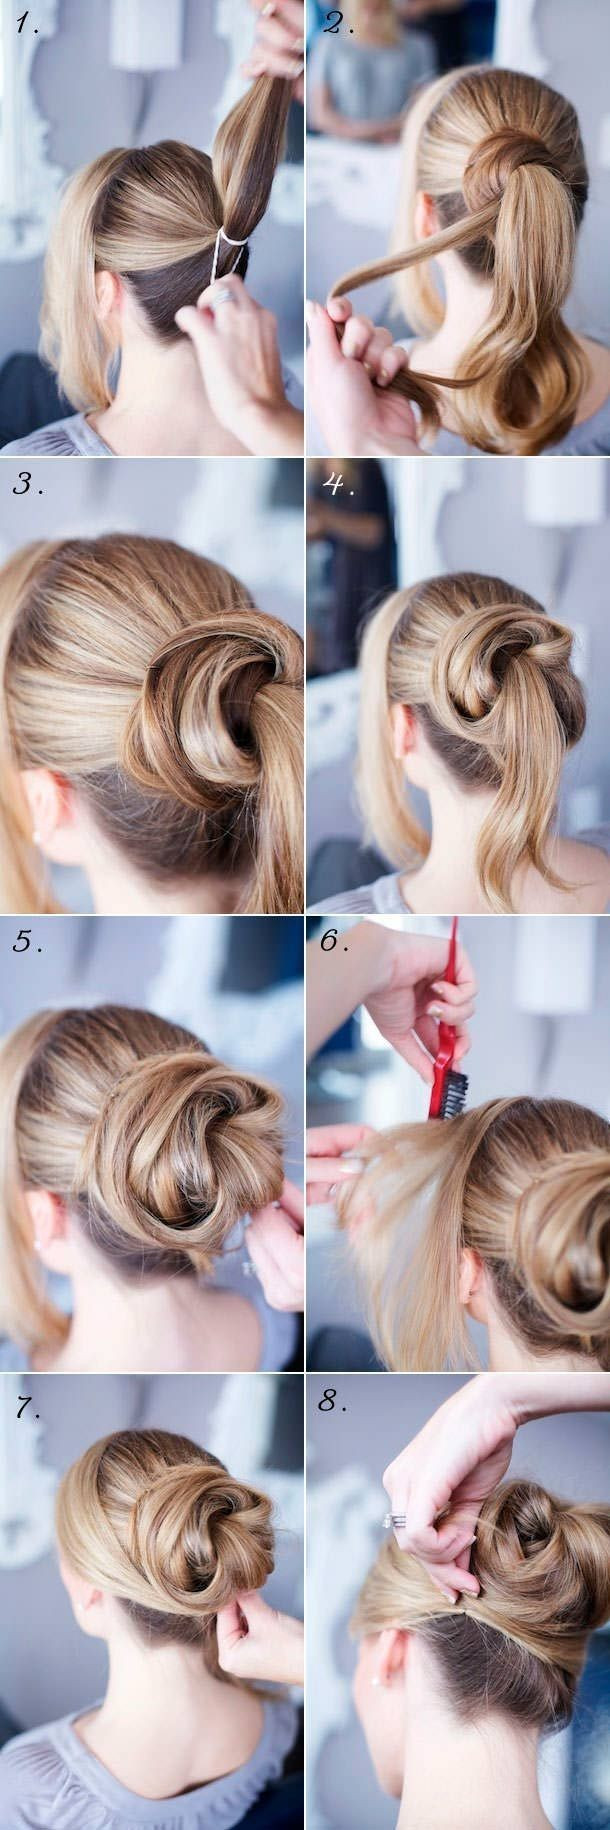 Easy Hairstyle Tutorials
 14 Easy Step by Step Updo Hairstyles Tutorials Pretty